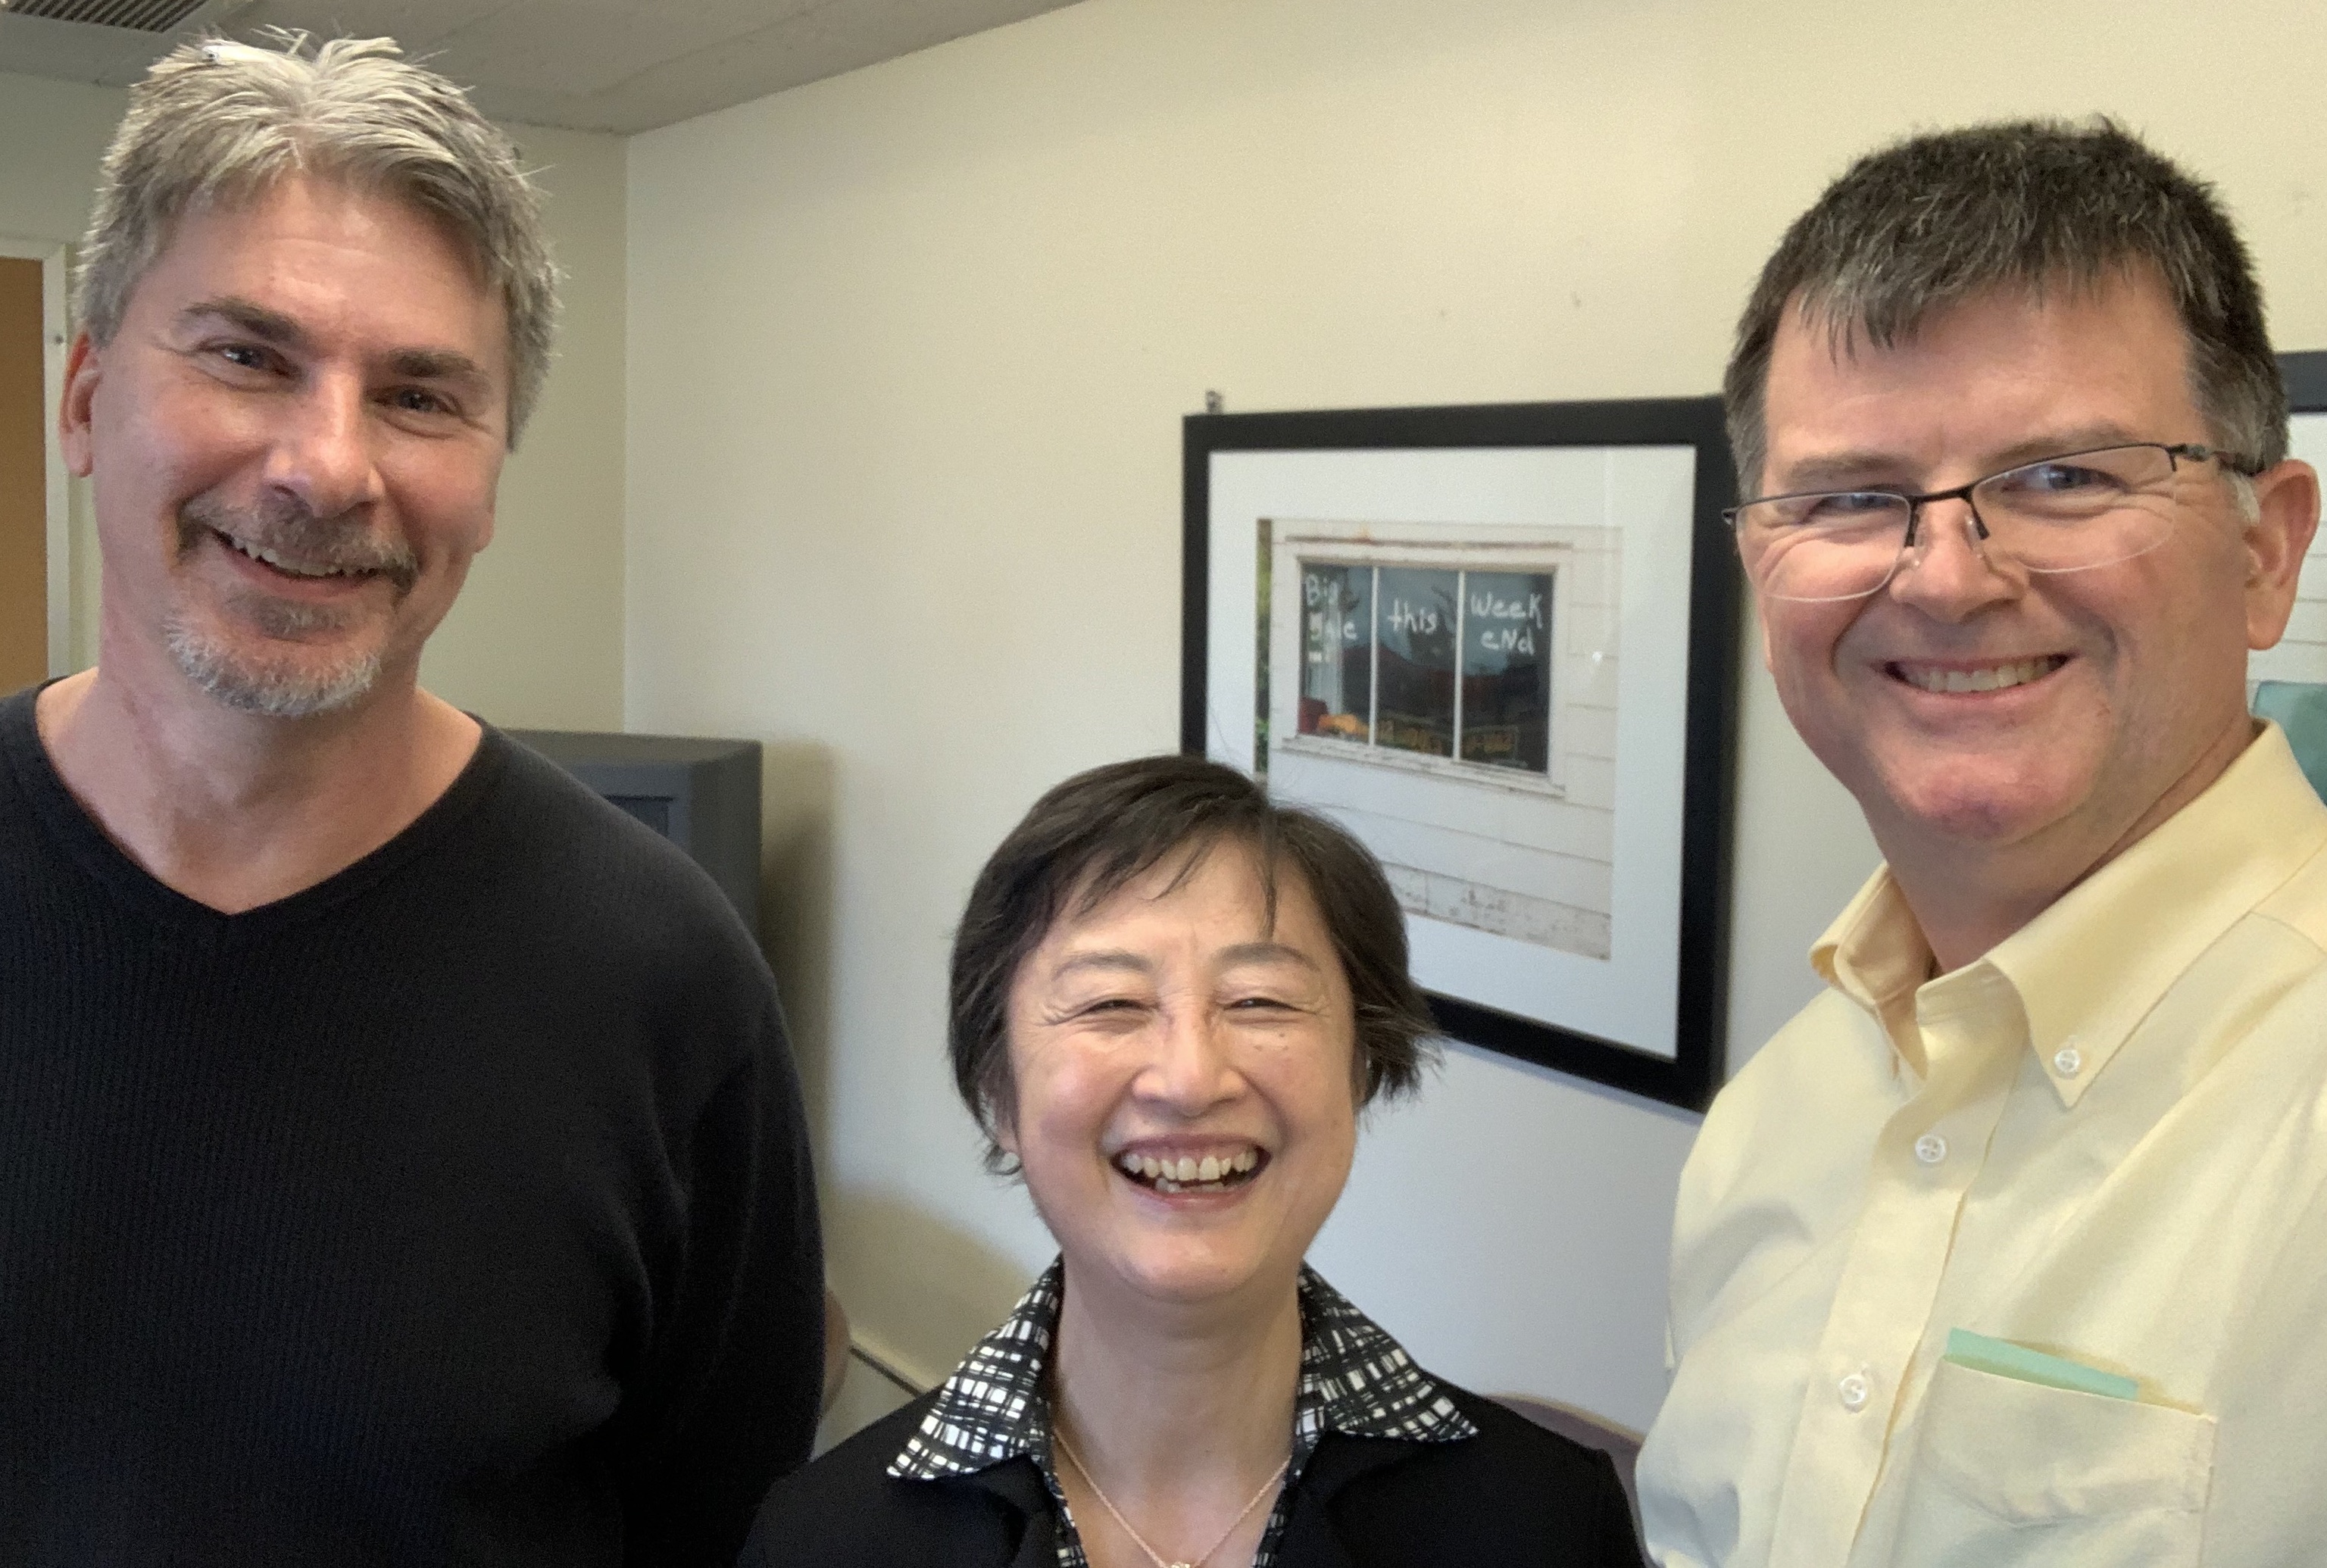 Dr. Rickert, Dr. Wu, and Dr. Dilger during the 2022 Hutton Lecture Series.